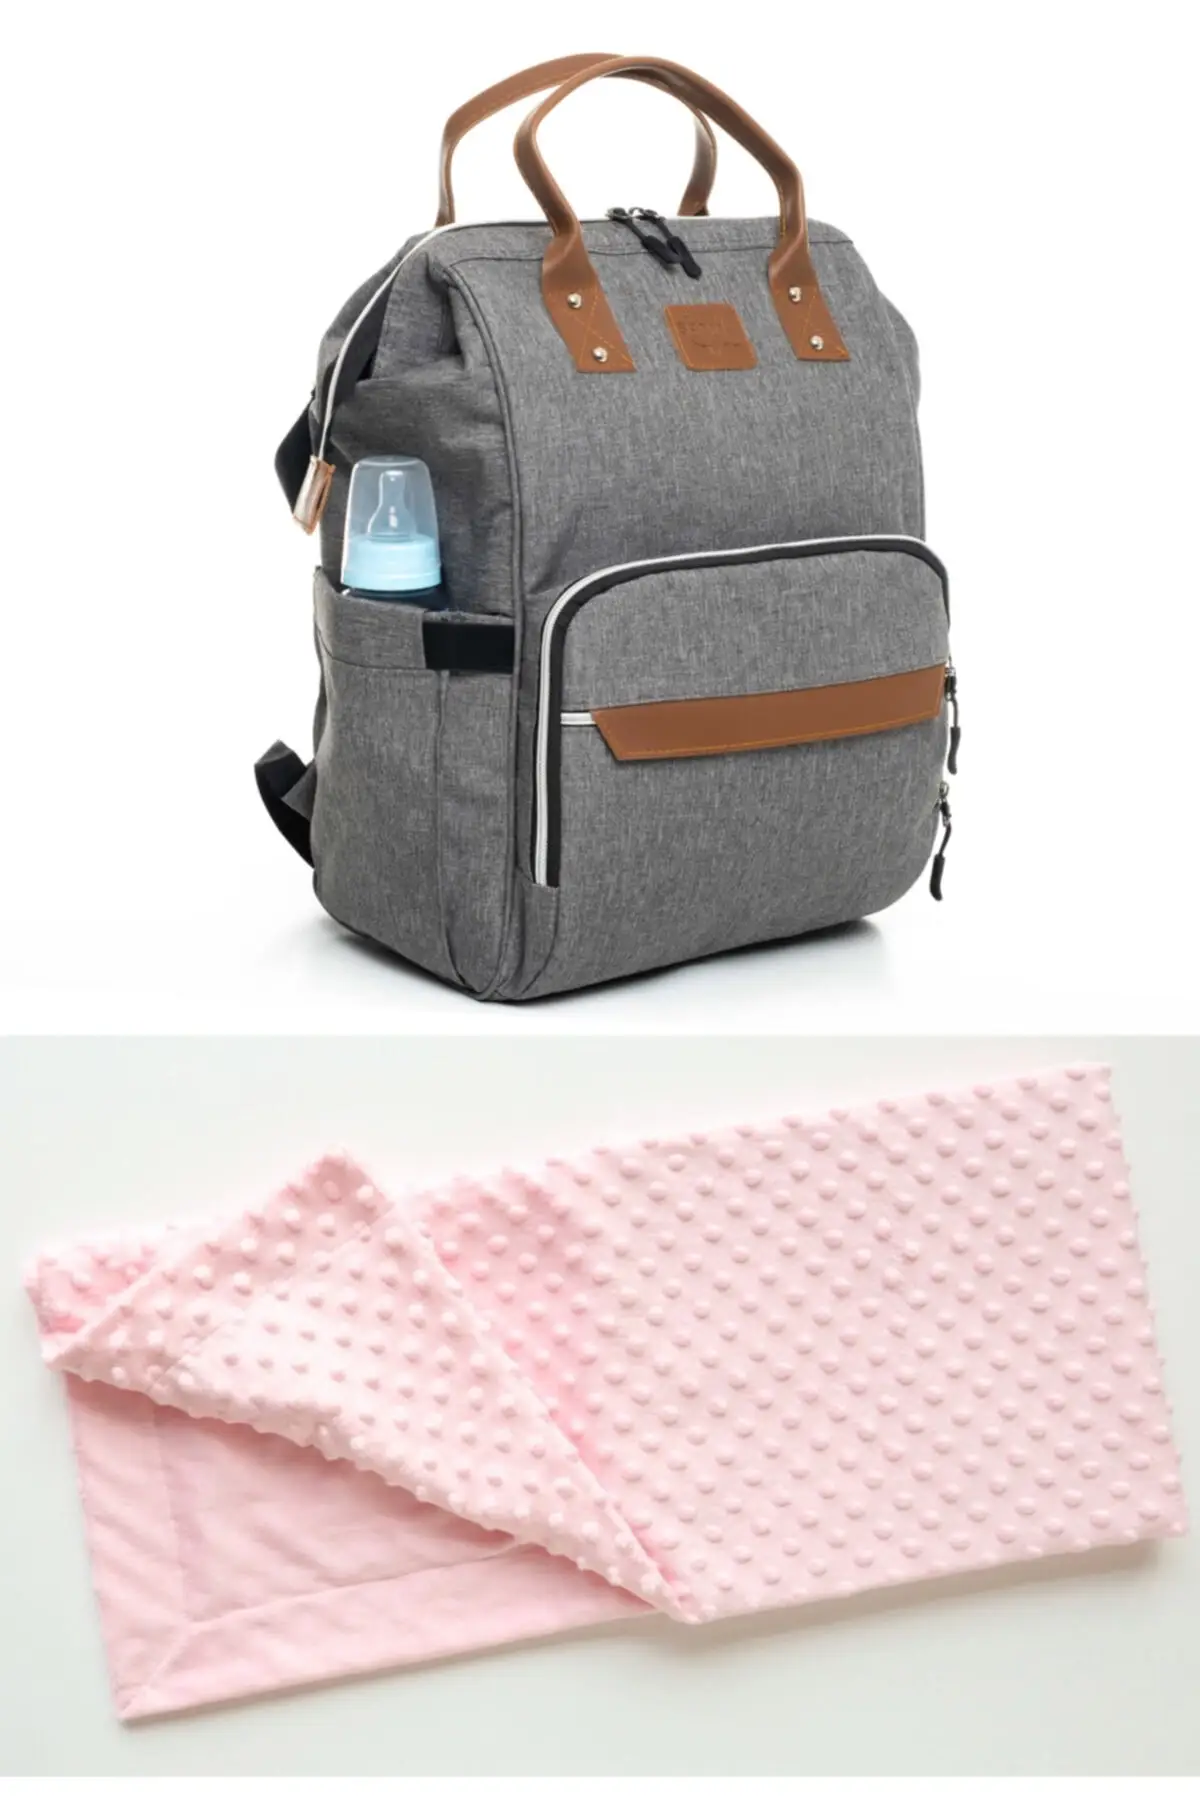 Waterproof thermal compartment baby care backpack mother baby care backpack and Nohut blanket set textile gray child